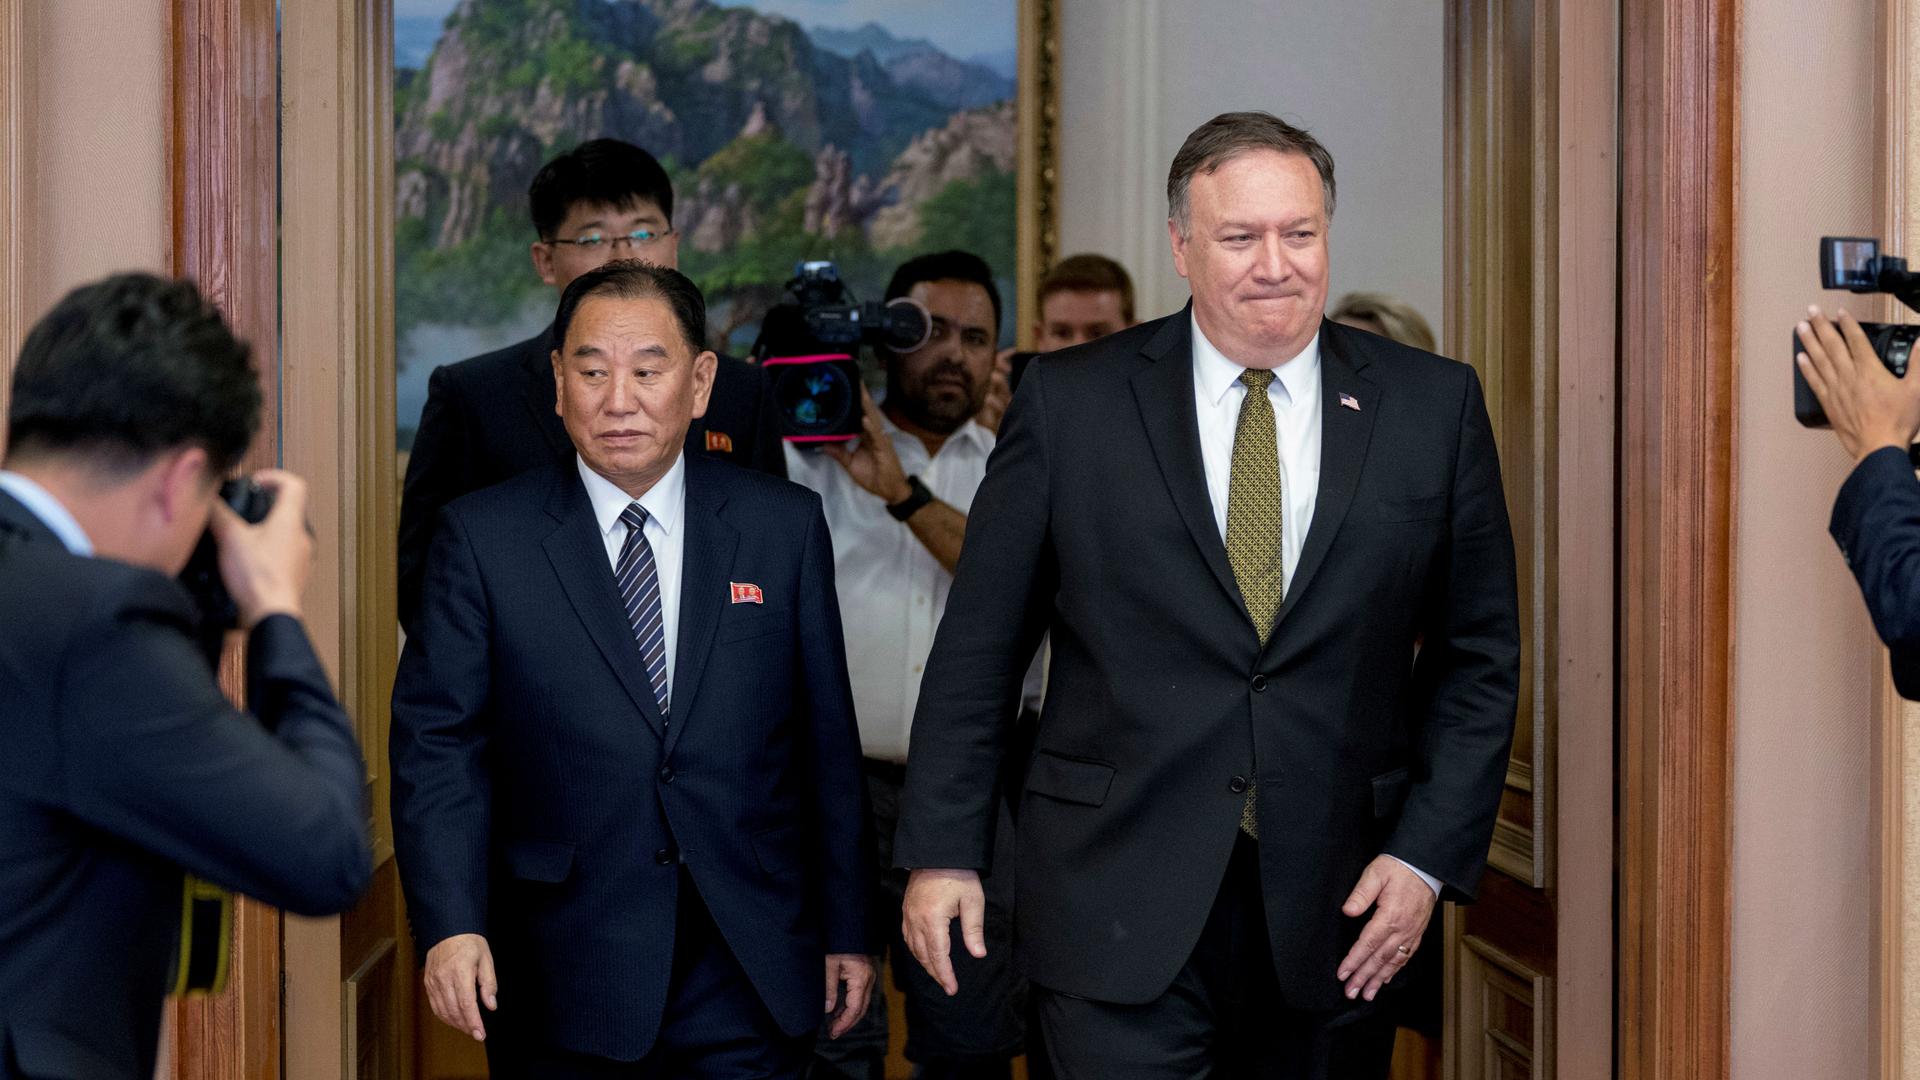 US Secretary of State Mike Pompeo and Kim Yong-chol, a North Korean senior ruling party official and former intelligence chief, return to discussions after a break at Park Hwa Guest House in Pyongyang, North Korea, July 7, 2018.